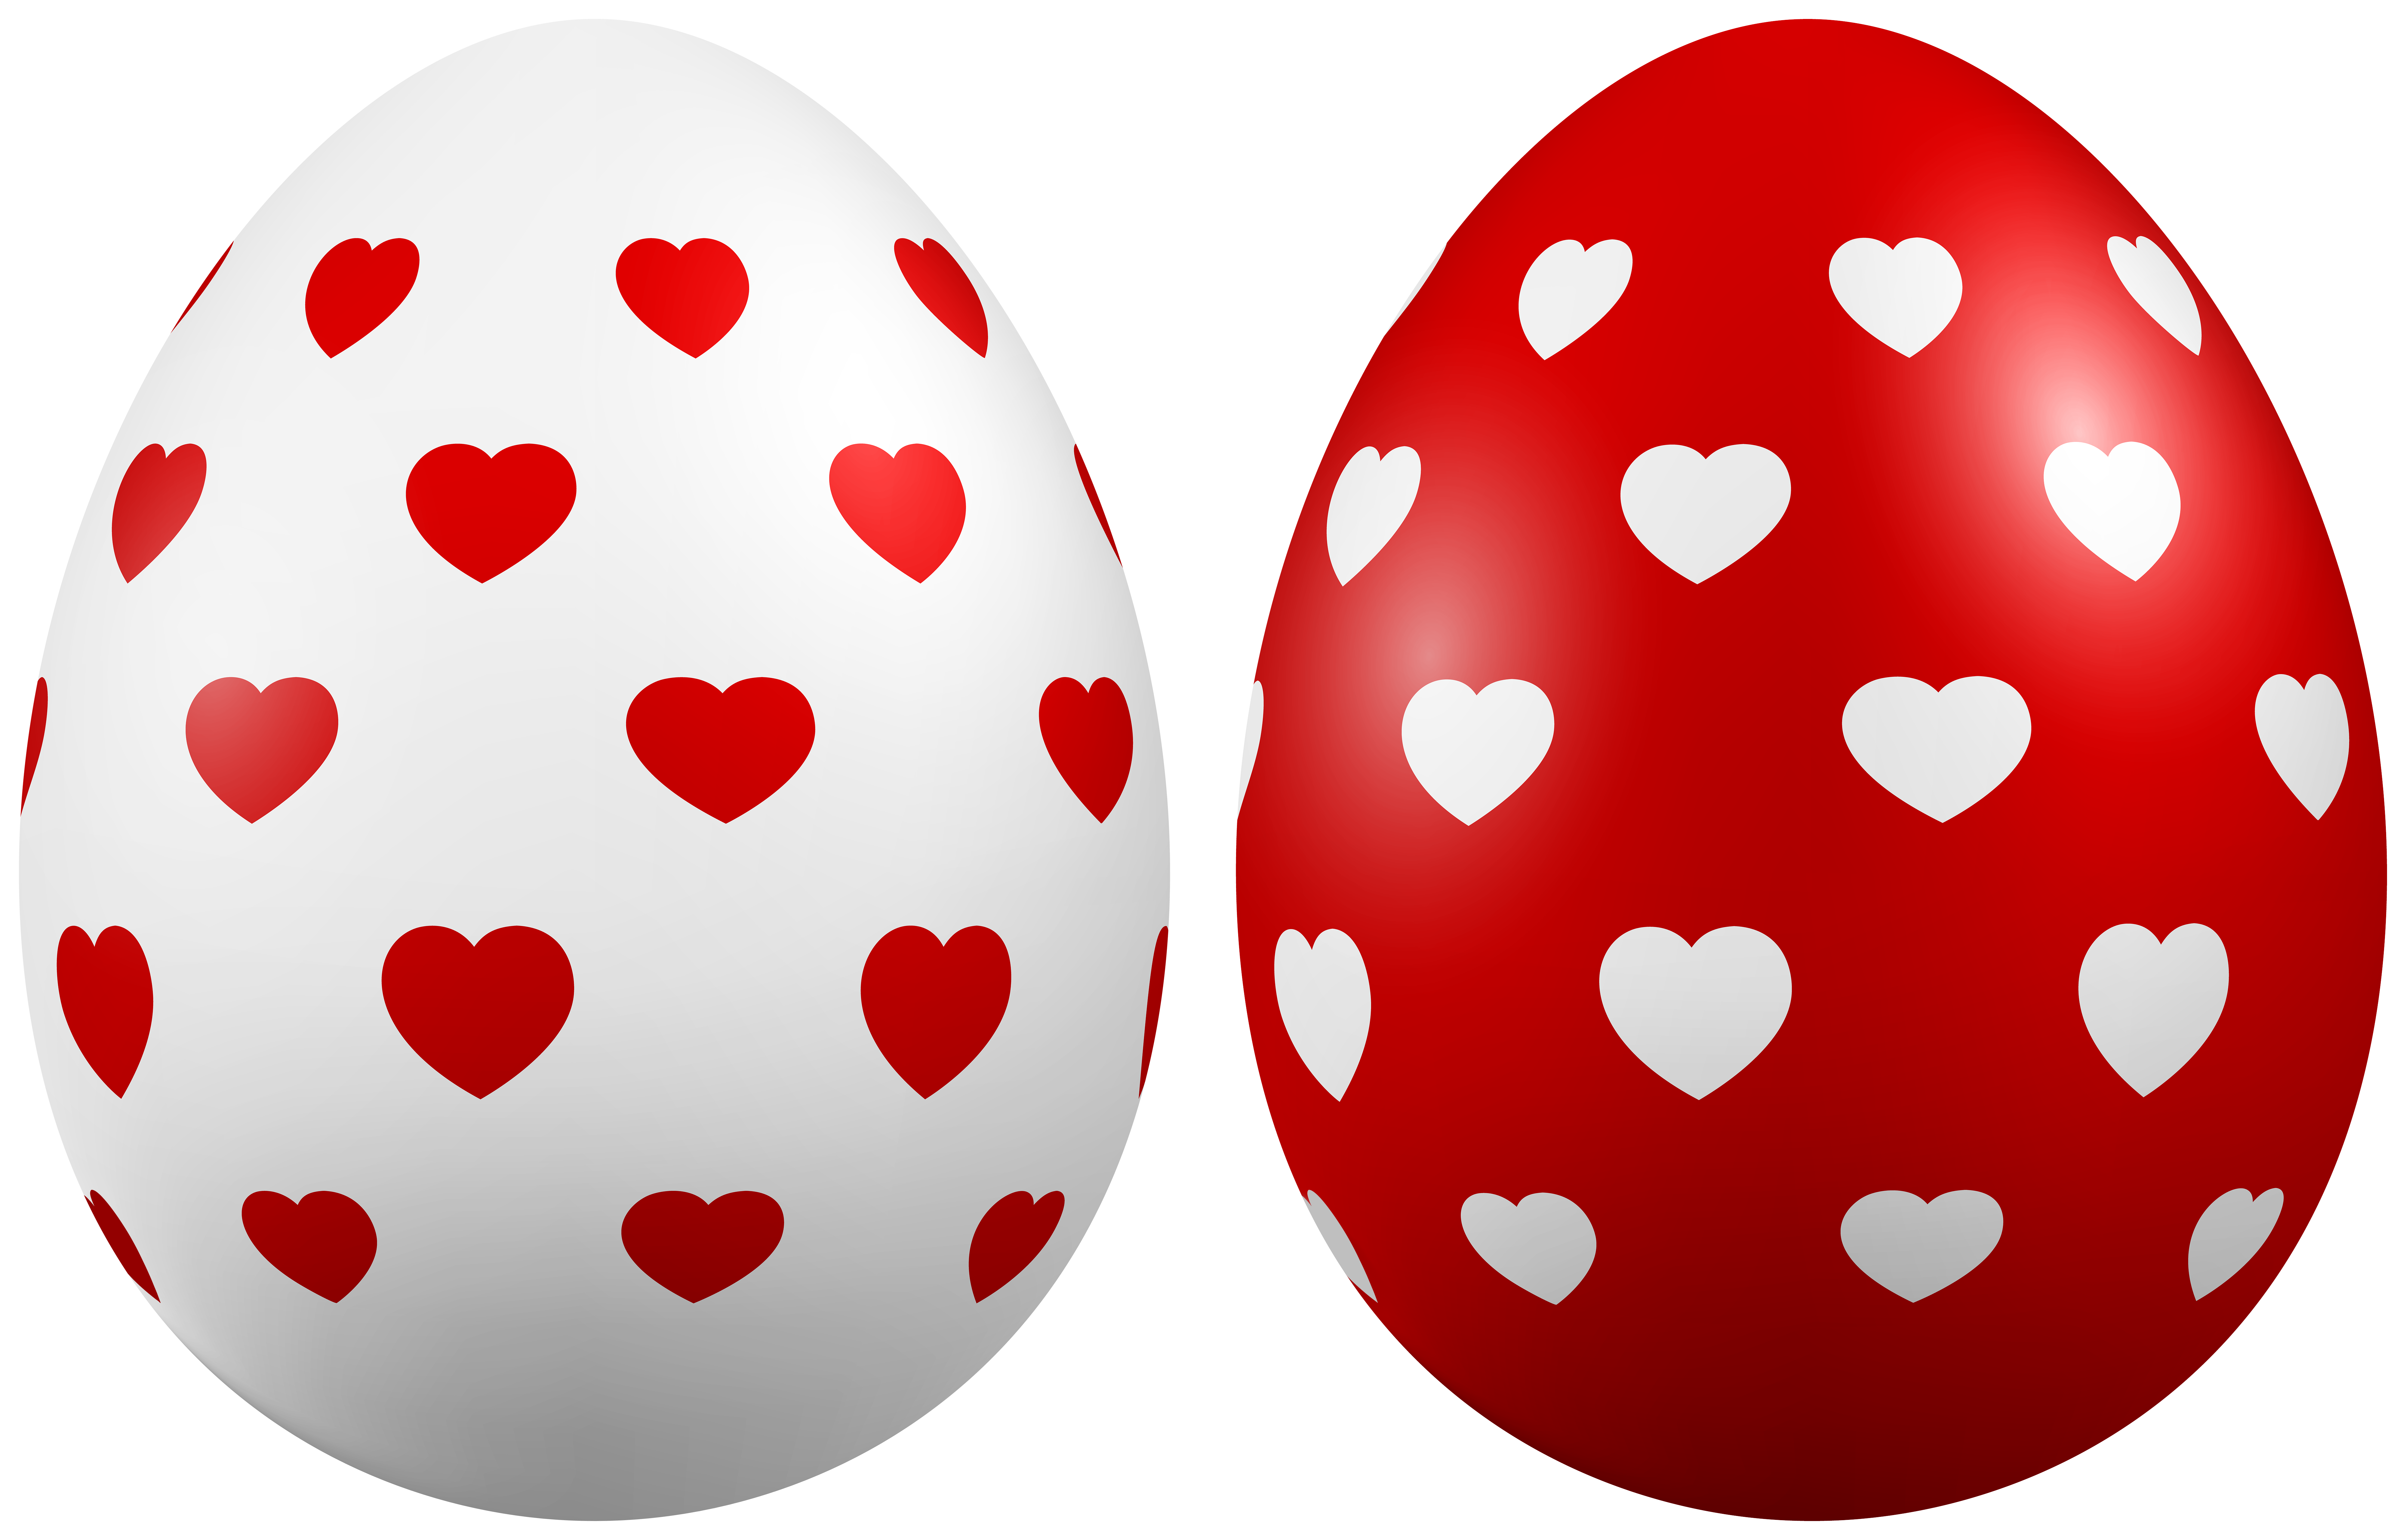 Red Easter Decorative Egg PNG Clip Art - Best WEB Clipart